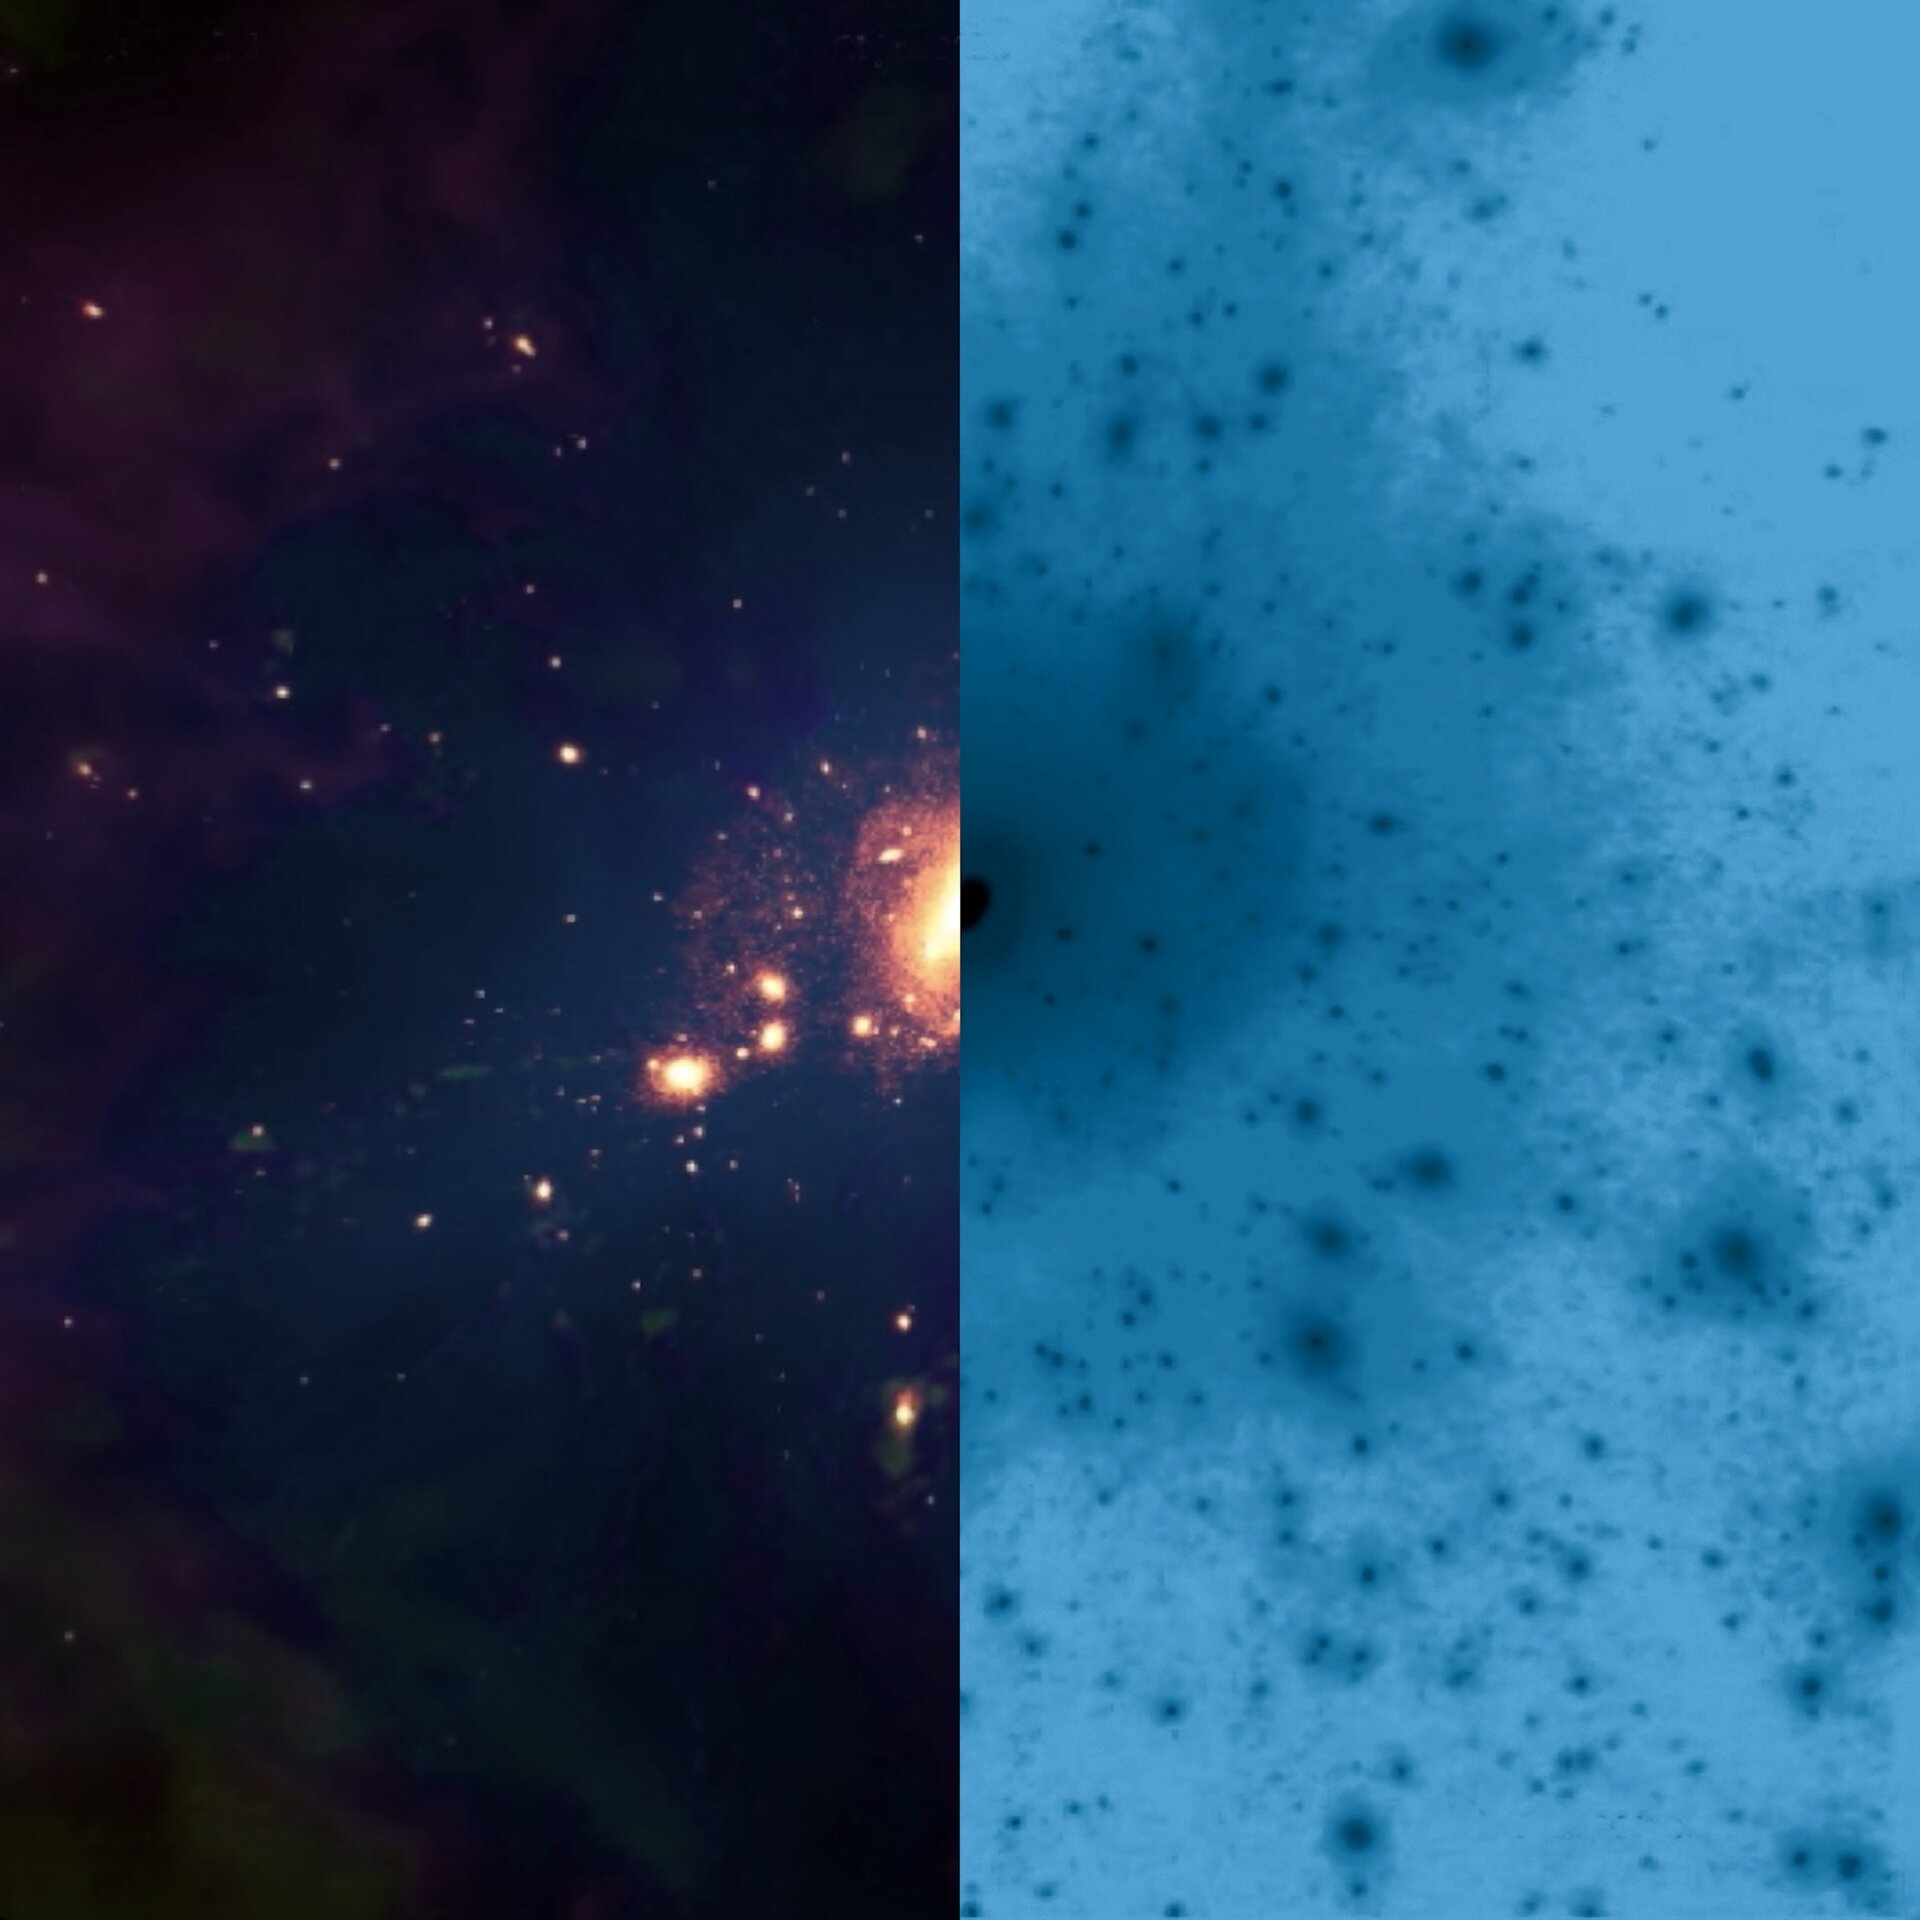 Astronomers study the influence of dark matter on the development of galaxies.